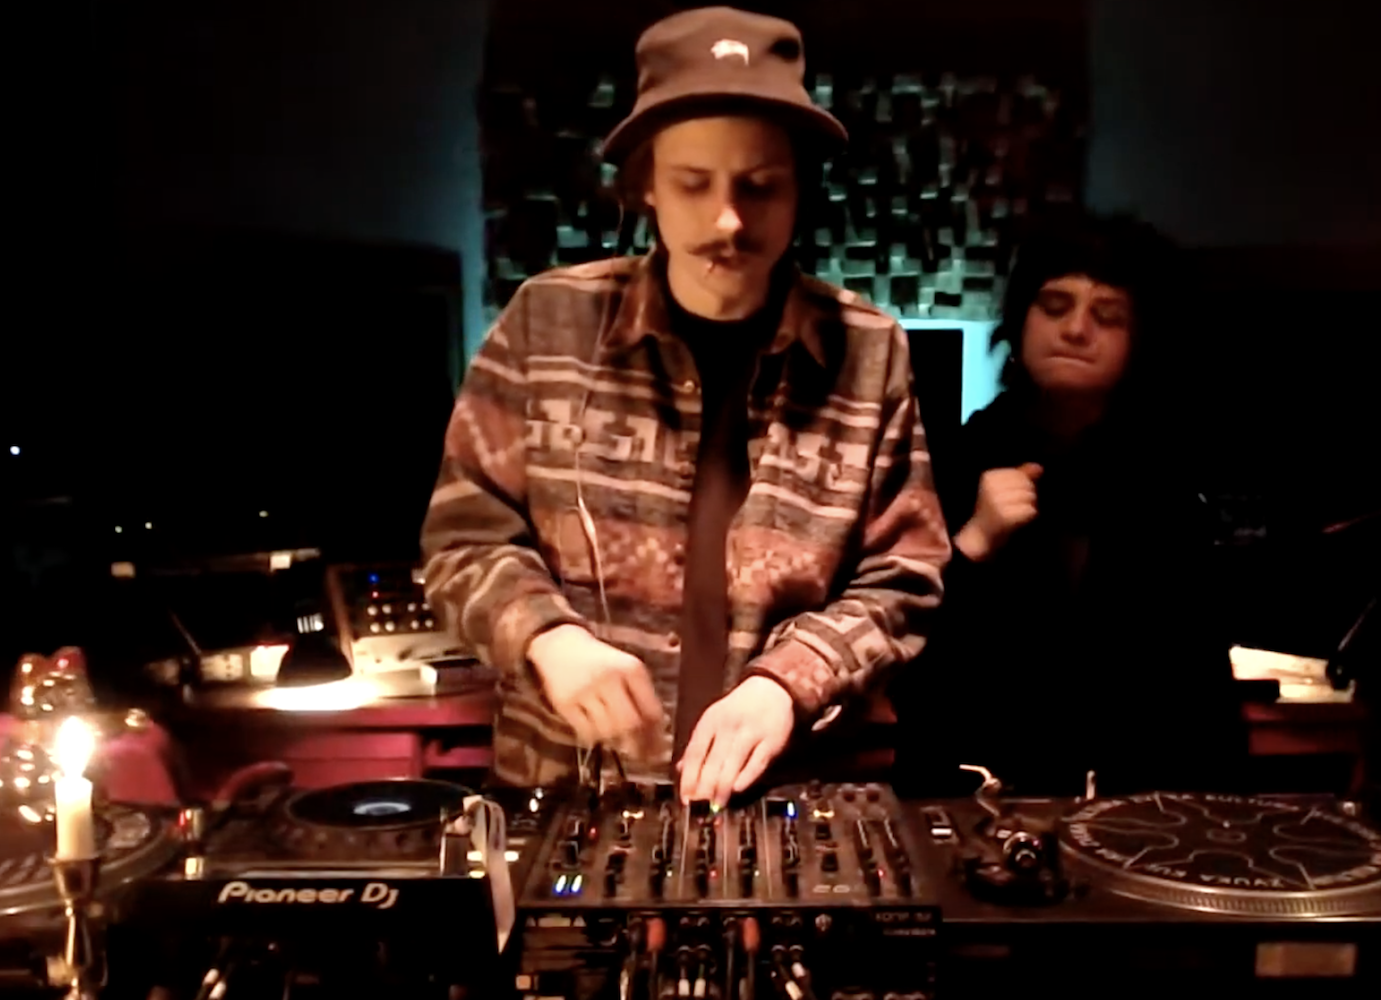 A Ukrainian club is live streaming DJ sets so you can party without leaving the house